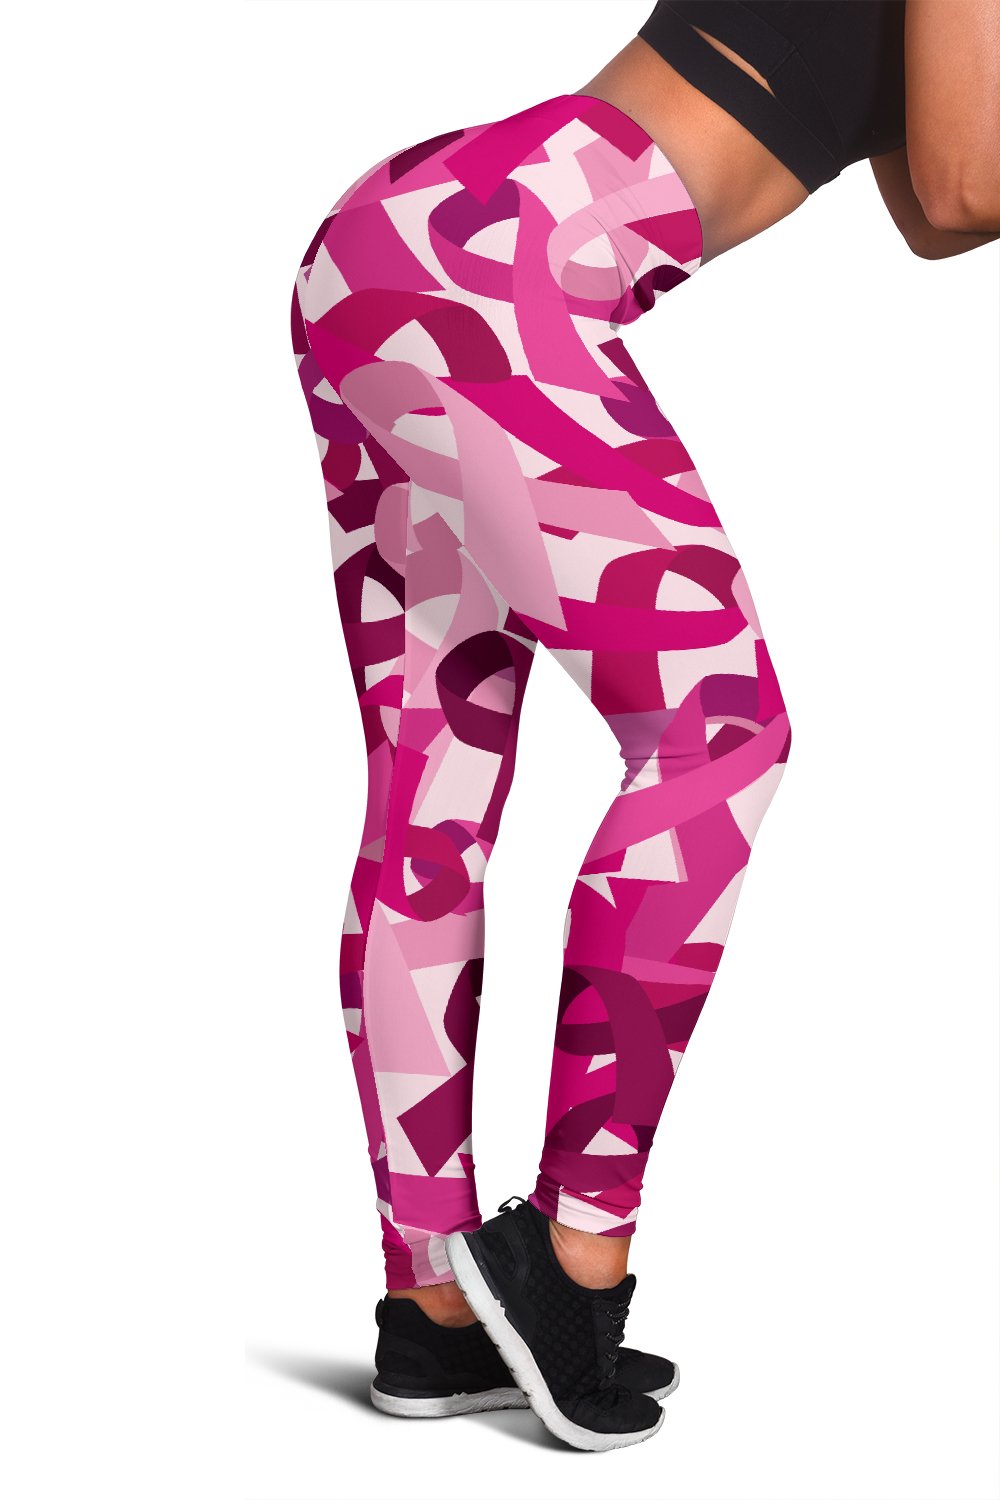 Pink Camo Tights, Breast Cancer Leggings